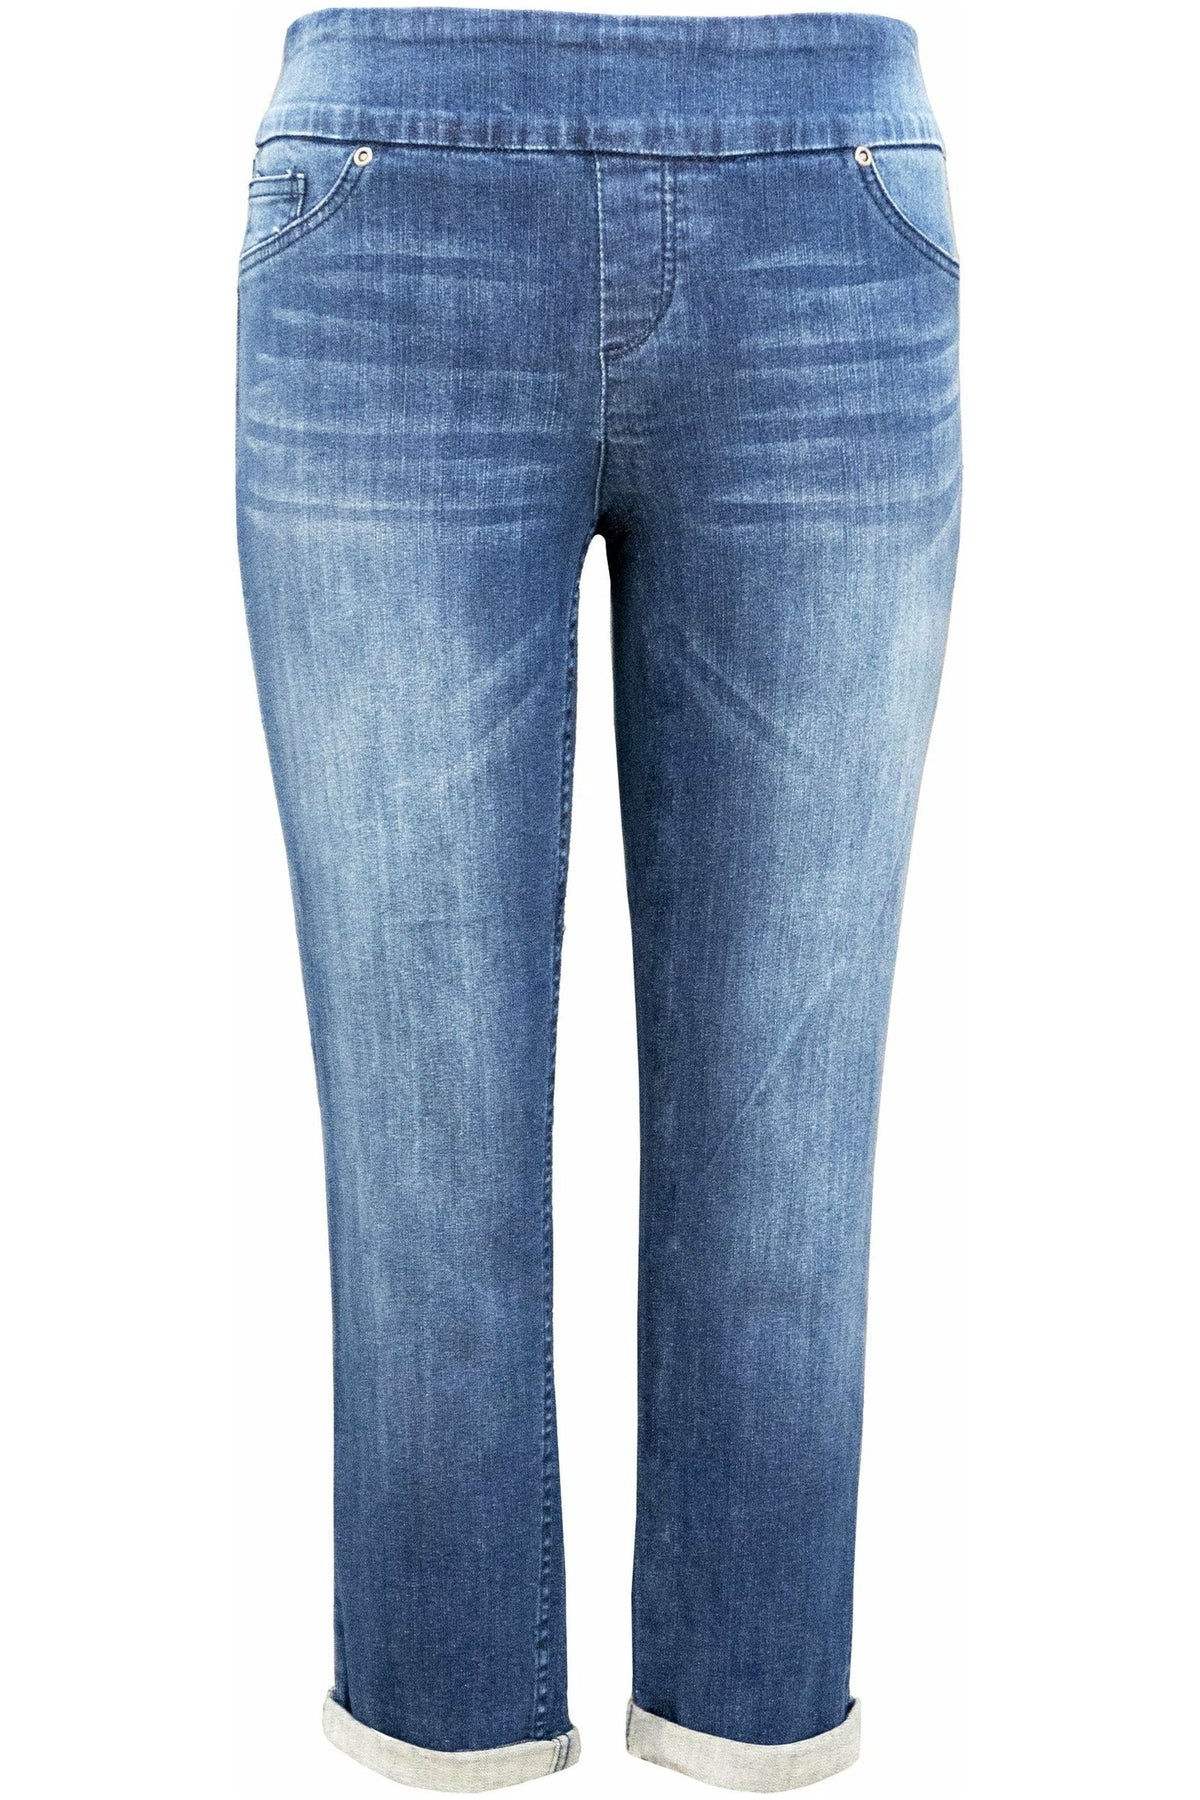 Up! Cropped Jean - Style 65759 front